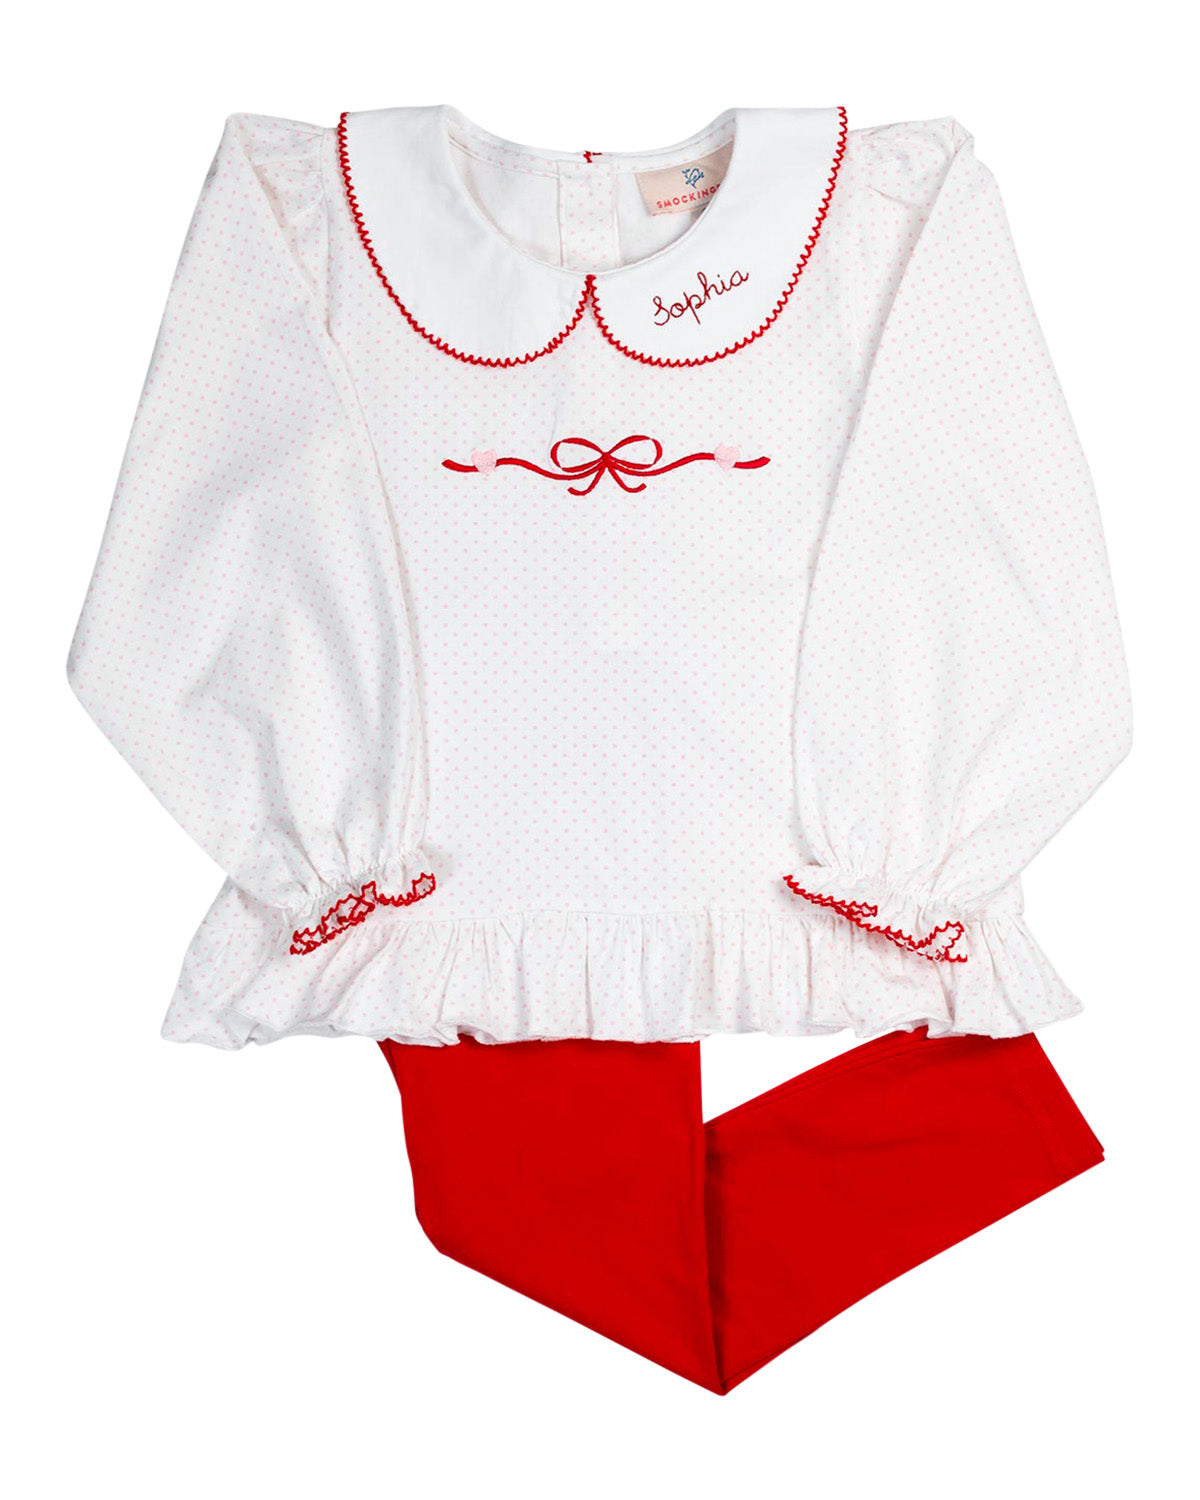 Bow with Hearts Embroidered Knit Legging Set- FINAL SALE